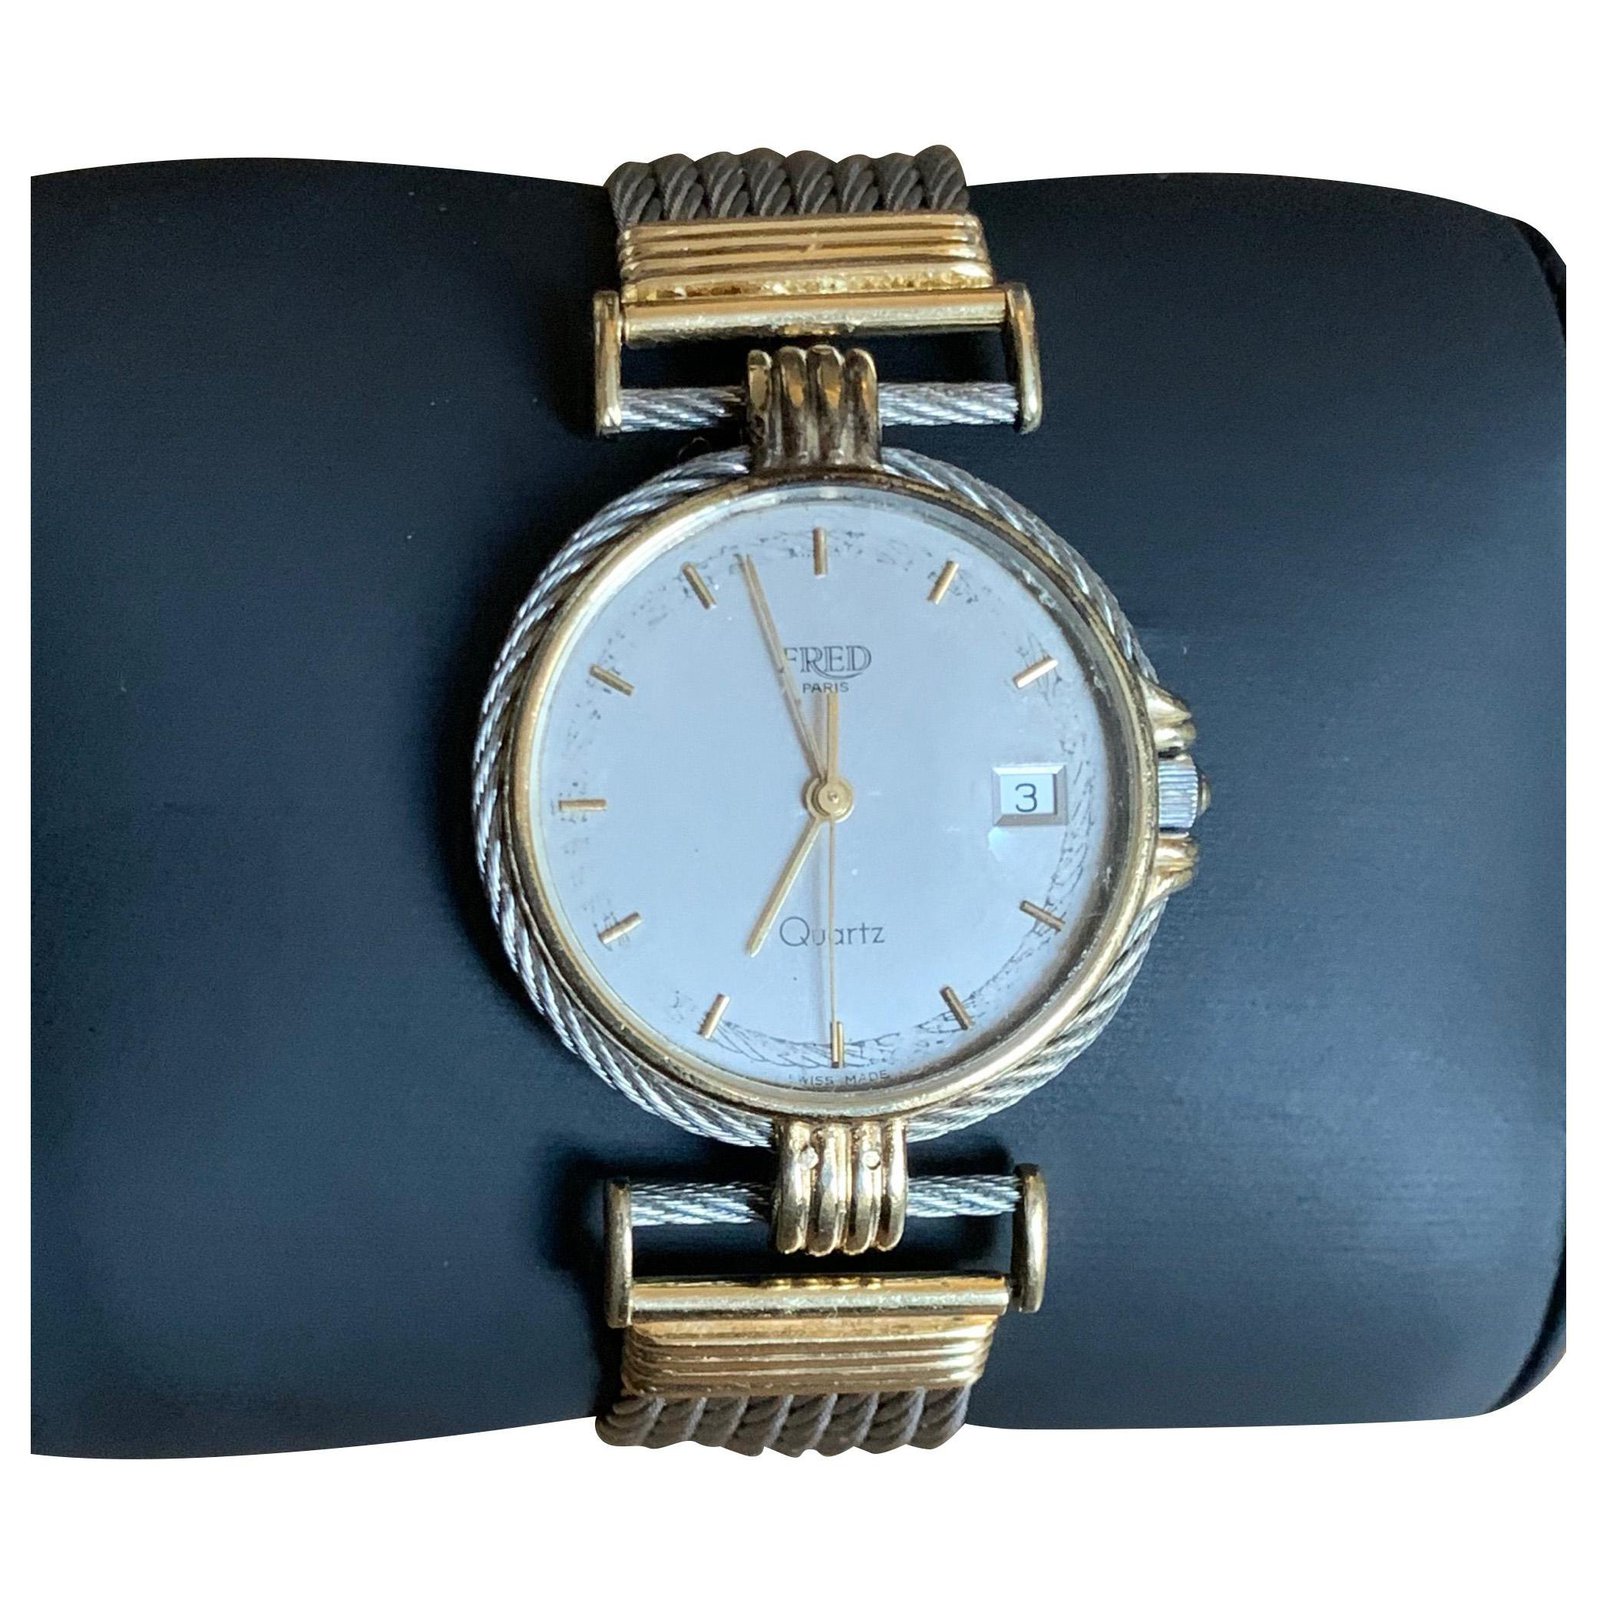 Women Jewelry & Watches Fred Women Watches Fred Women Wrist Watches Fred Women Wrist Watches Fred Women Wrist Watch FRED golden 